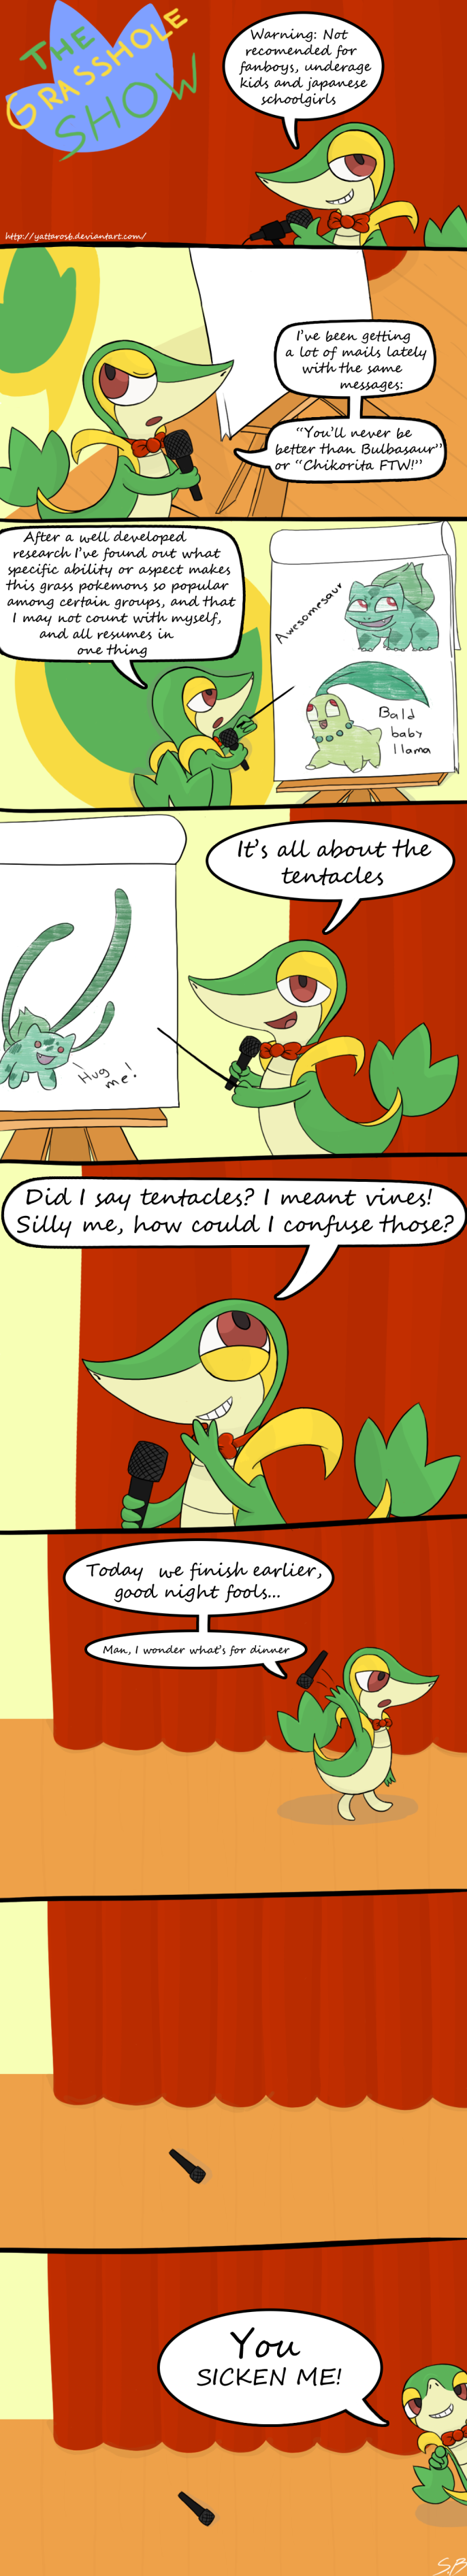 The_Grasshole_Show_2_by_YattaroSB.png